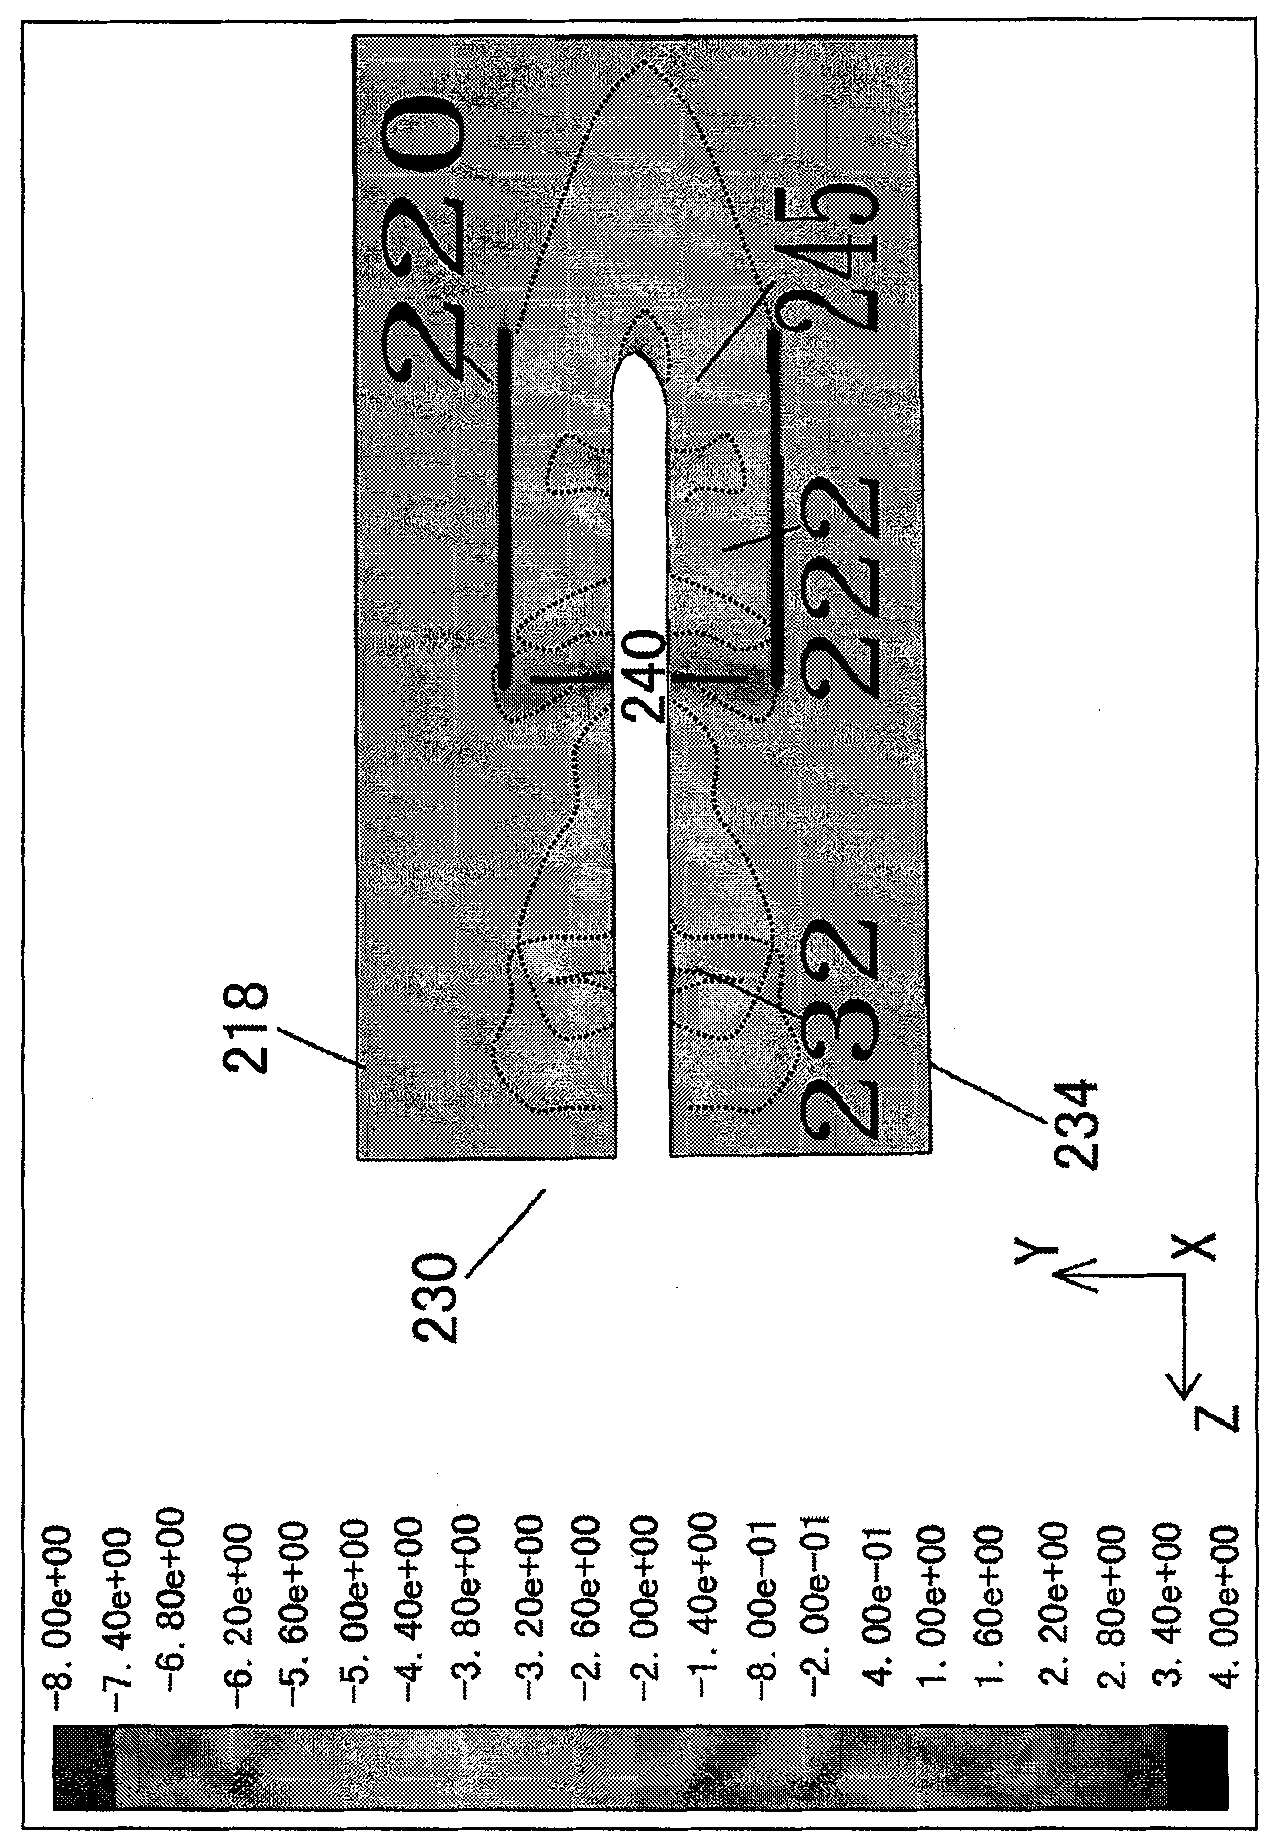 Jet propeller and outboard engine device with the jet propeller